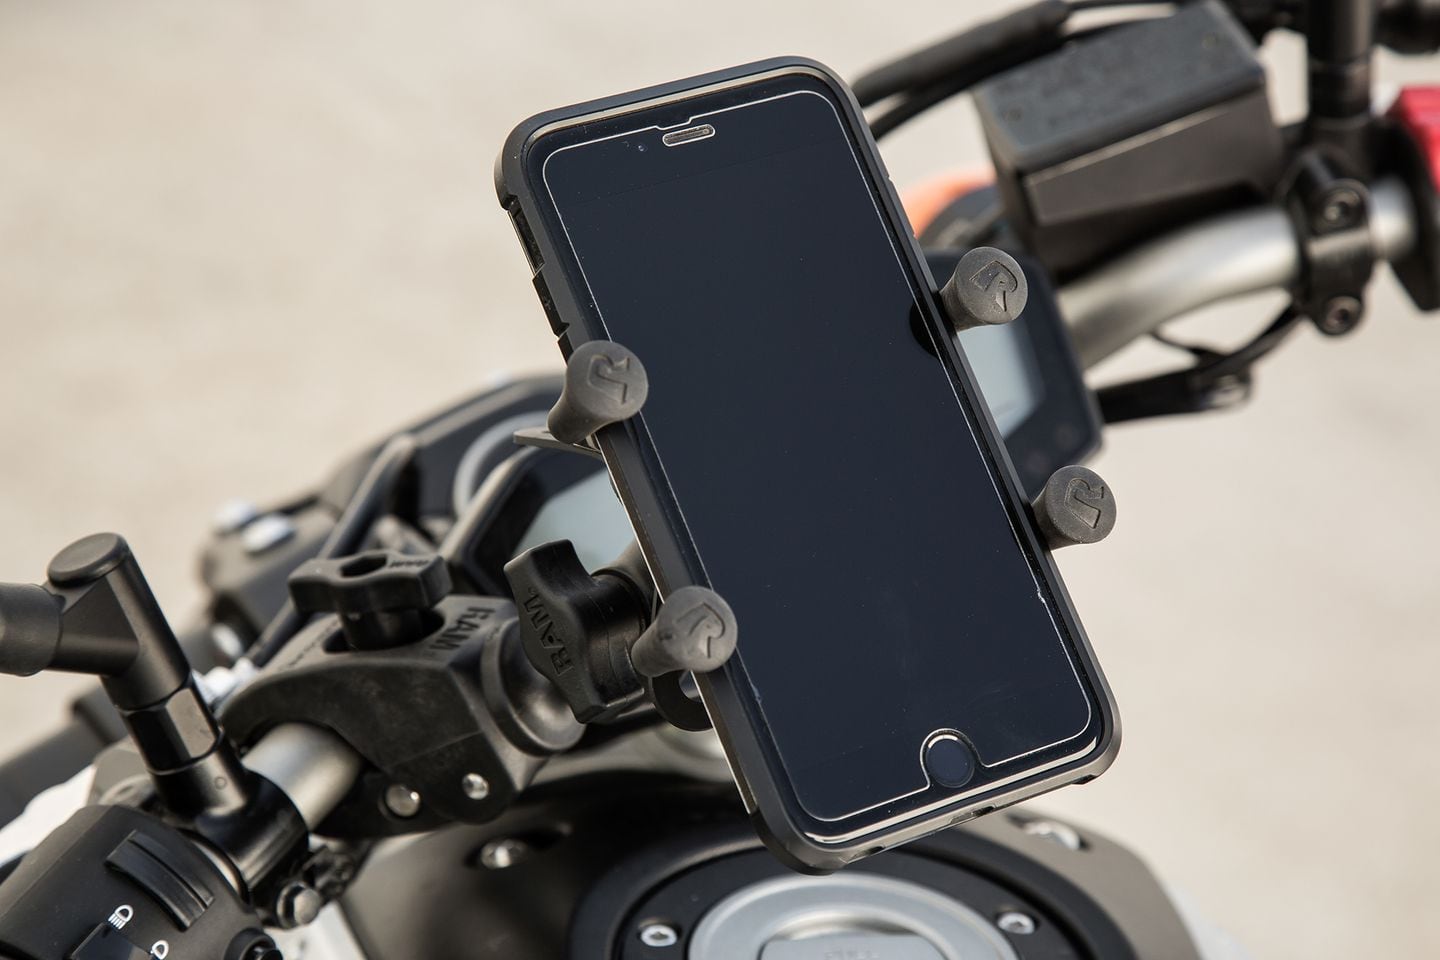 RAM Mounts Small Tough-Clamp Mount fits Cell Phones Smartphones 